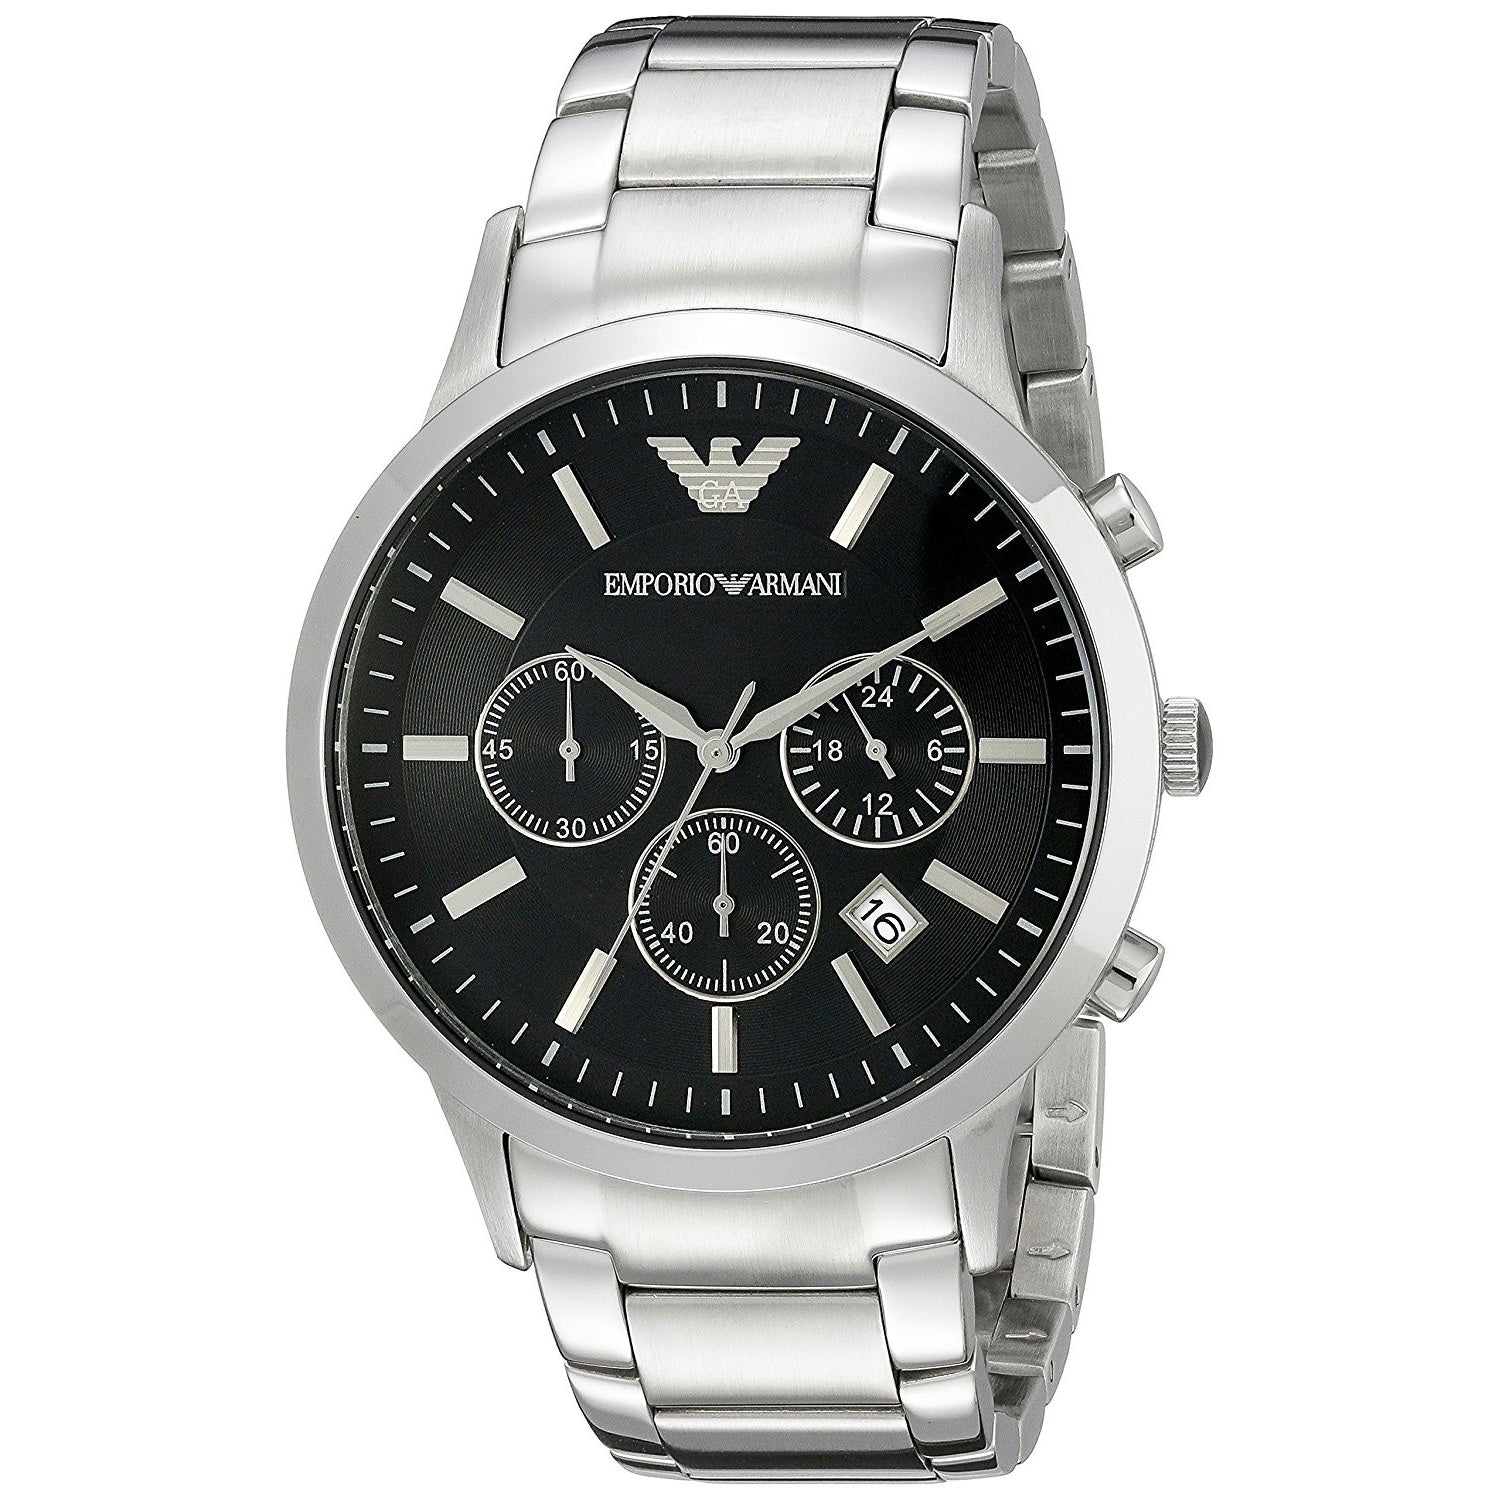 Emporio Armani Men's AR2434 'Classic' Chronograph Stainless Steel Watch ...